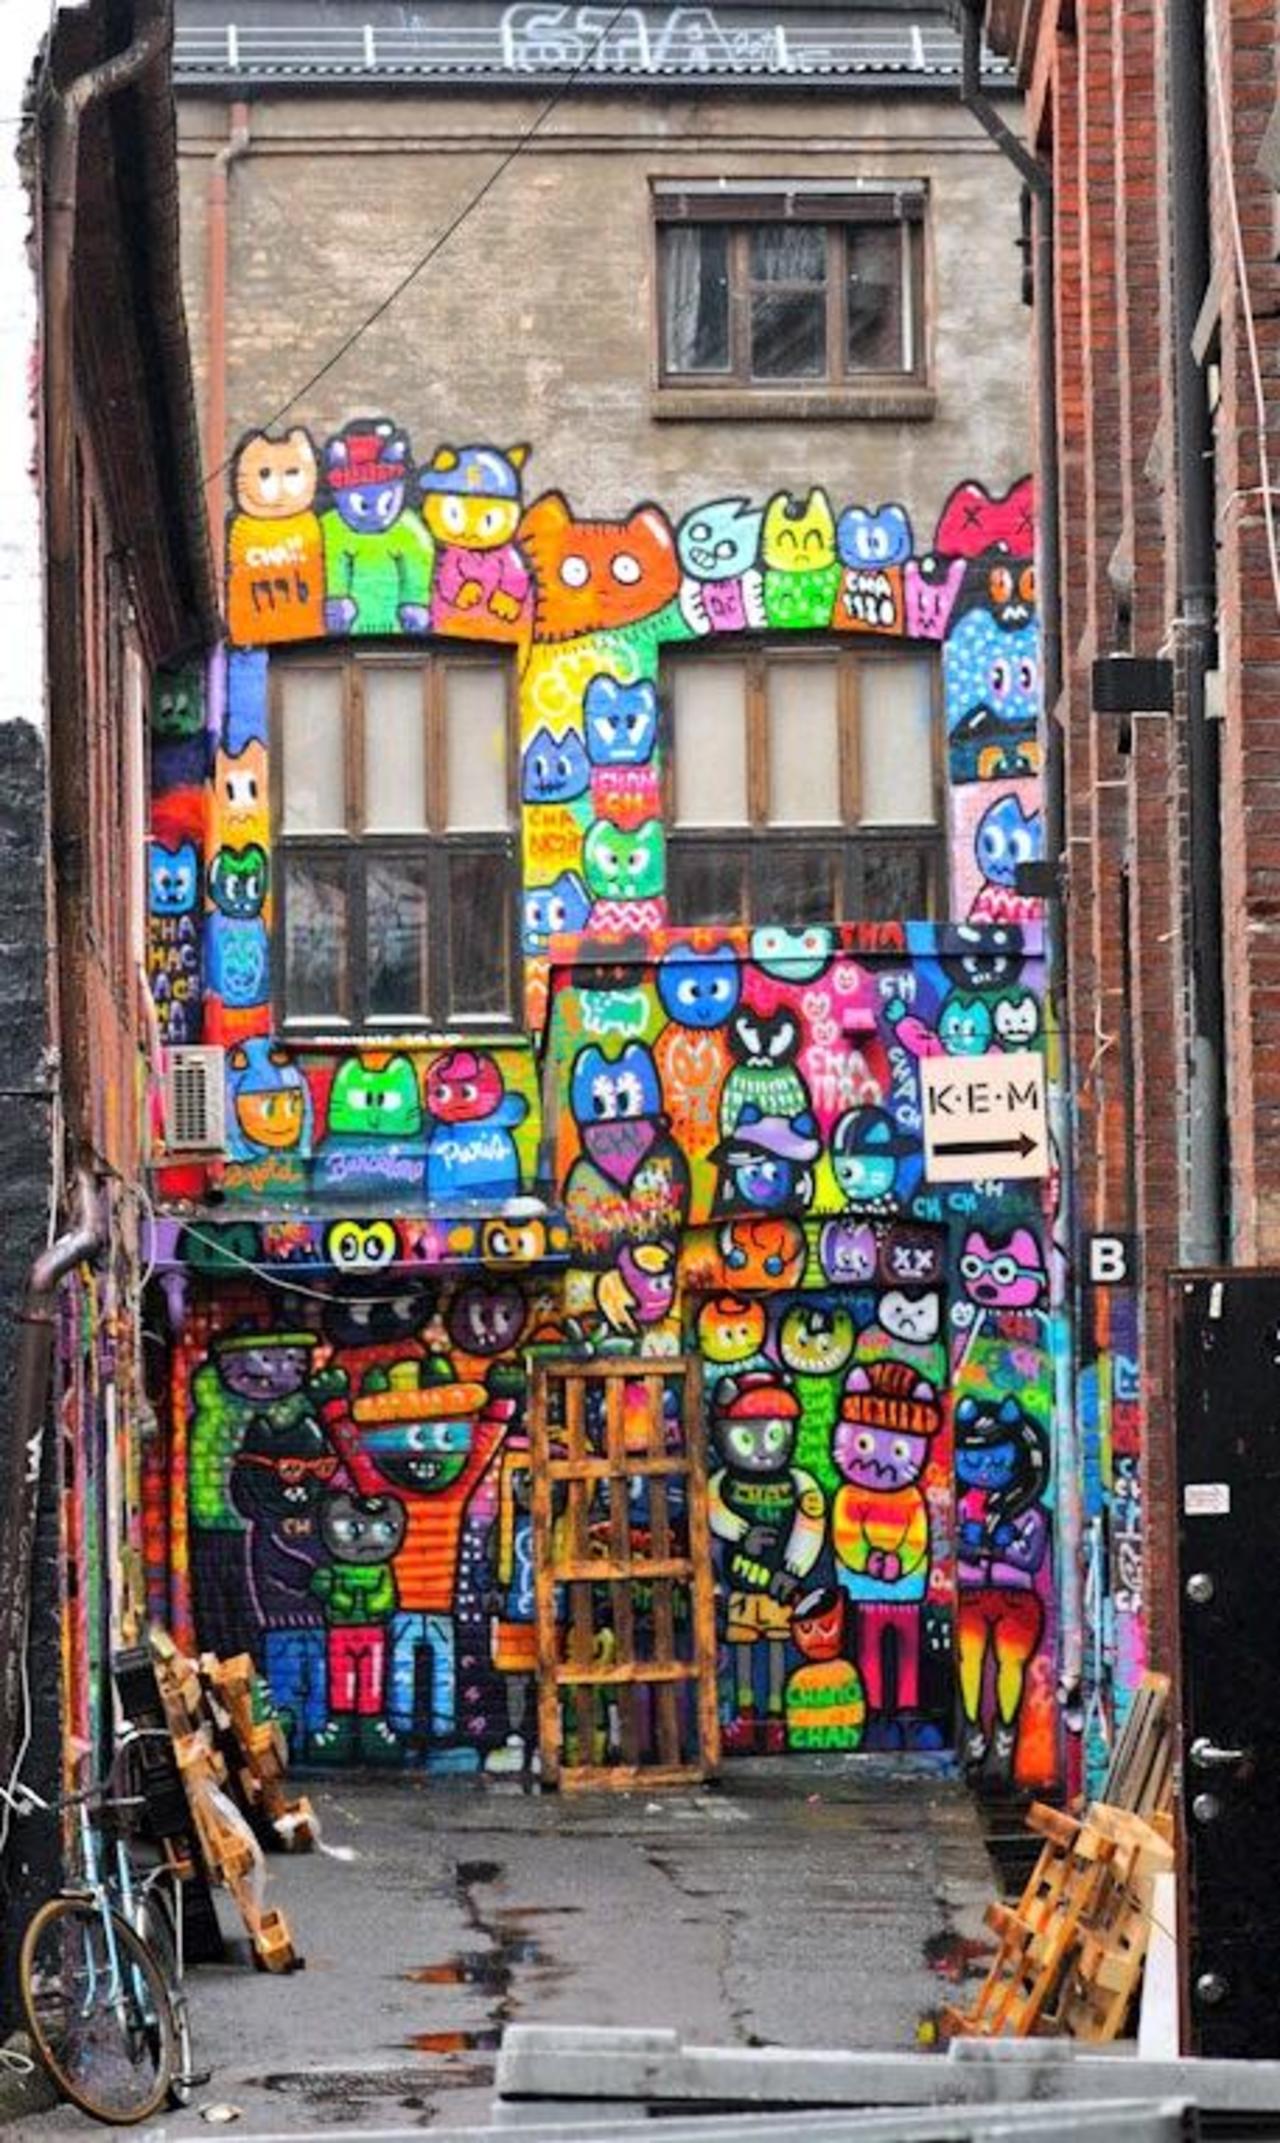 We brought some guests in your street to cheer you up  #streetart #graffiti #art #urbanart http://t.co/88VeheBd9z”